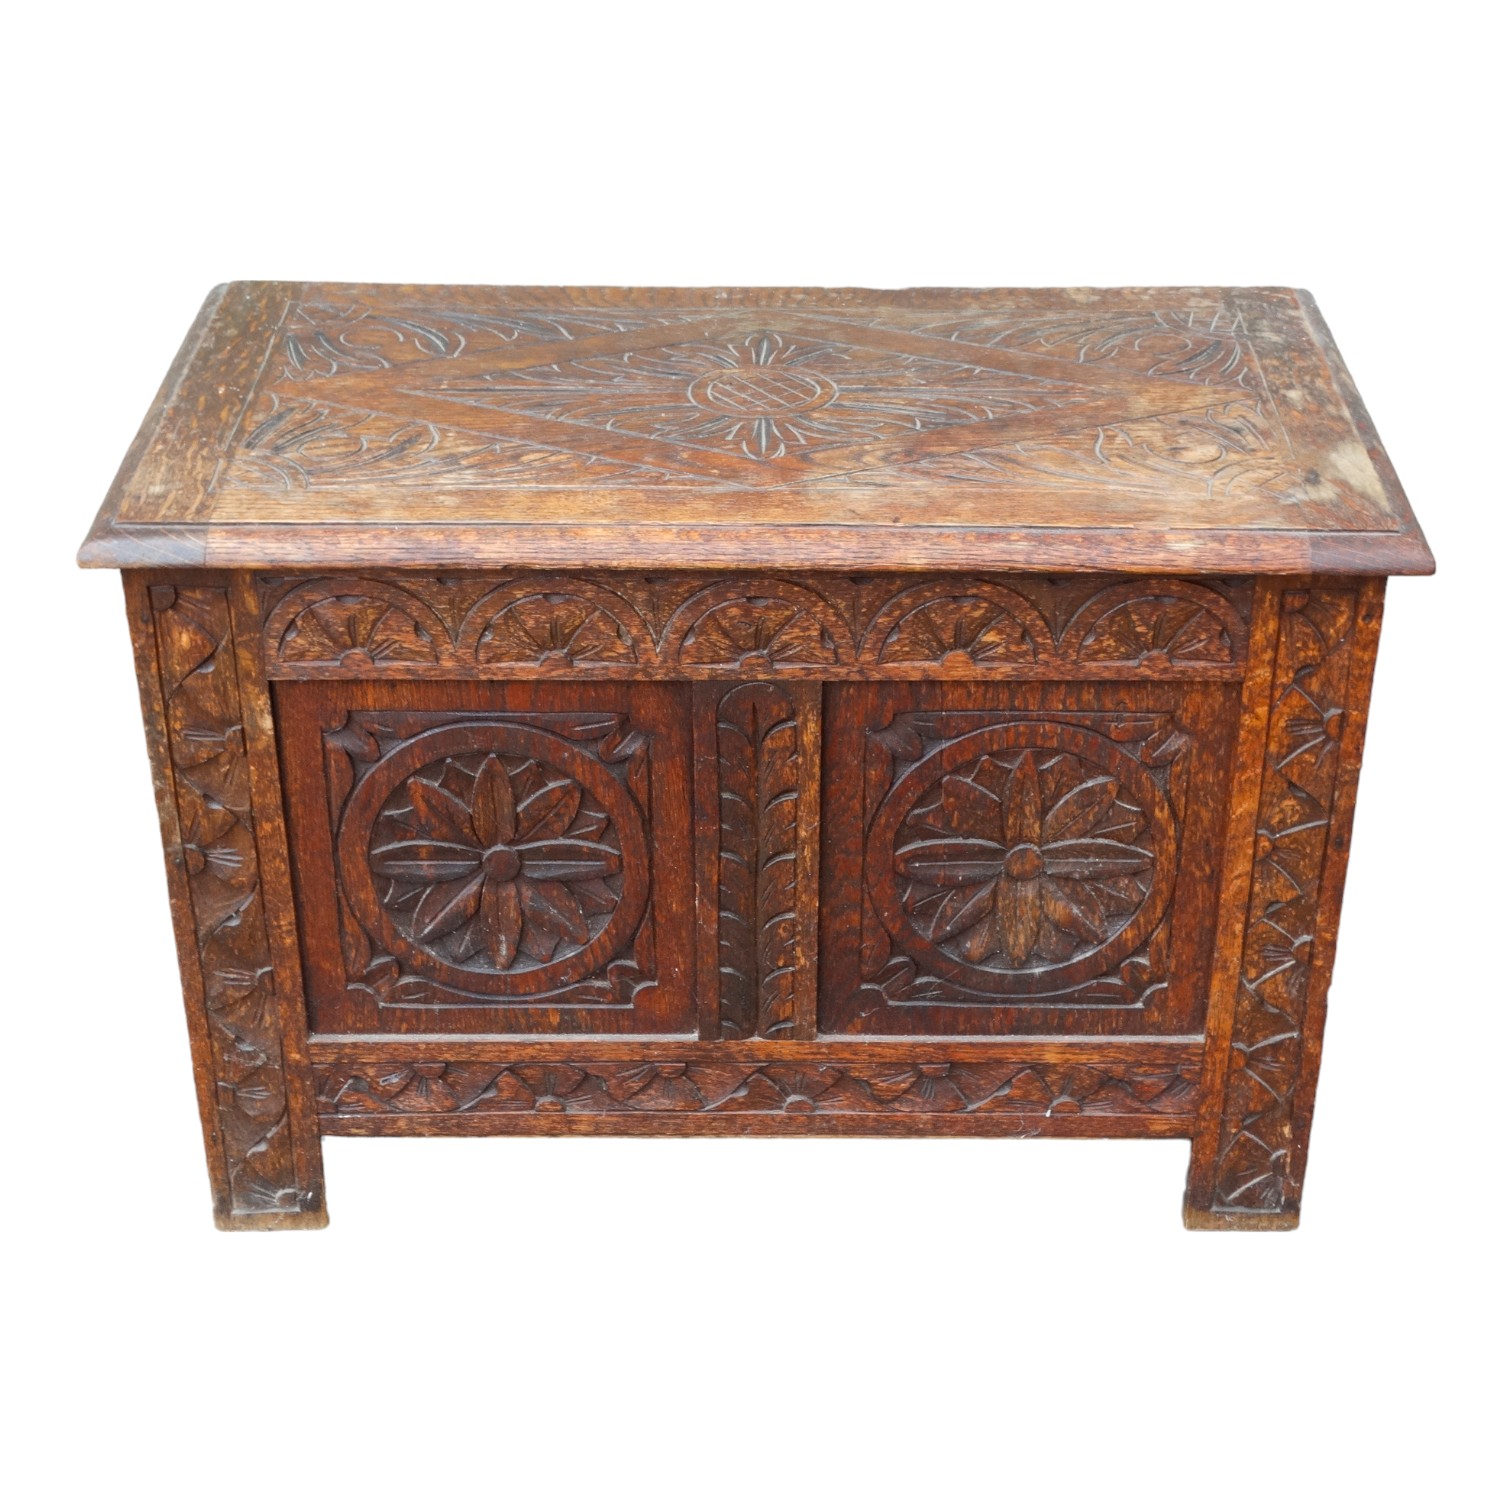 A 17th century style oak coffer - decorated with leaf carved panels, 75cm x 42cm x 51cm